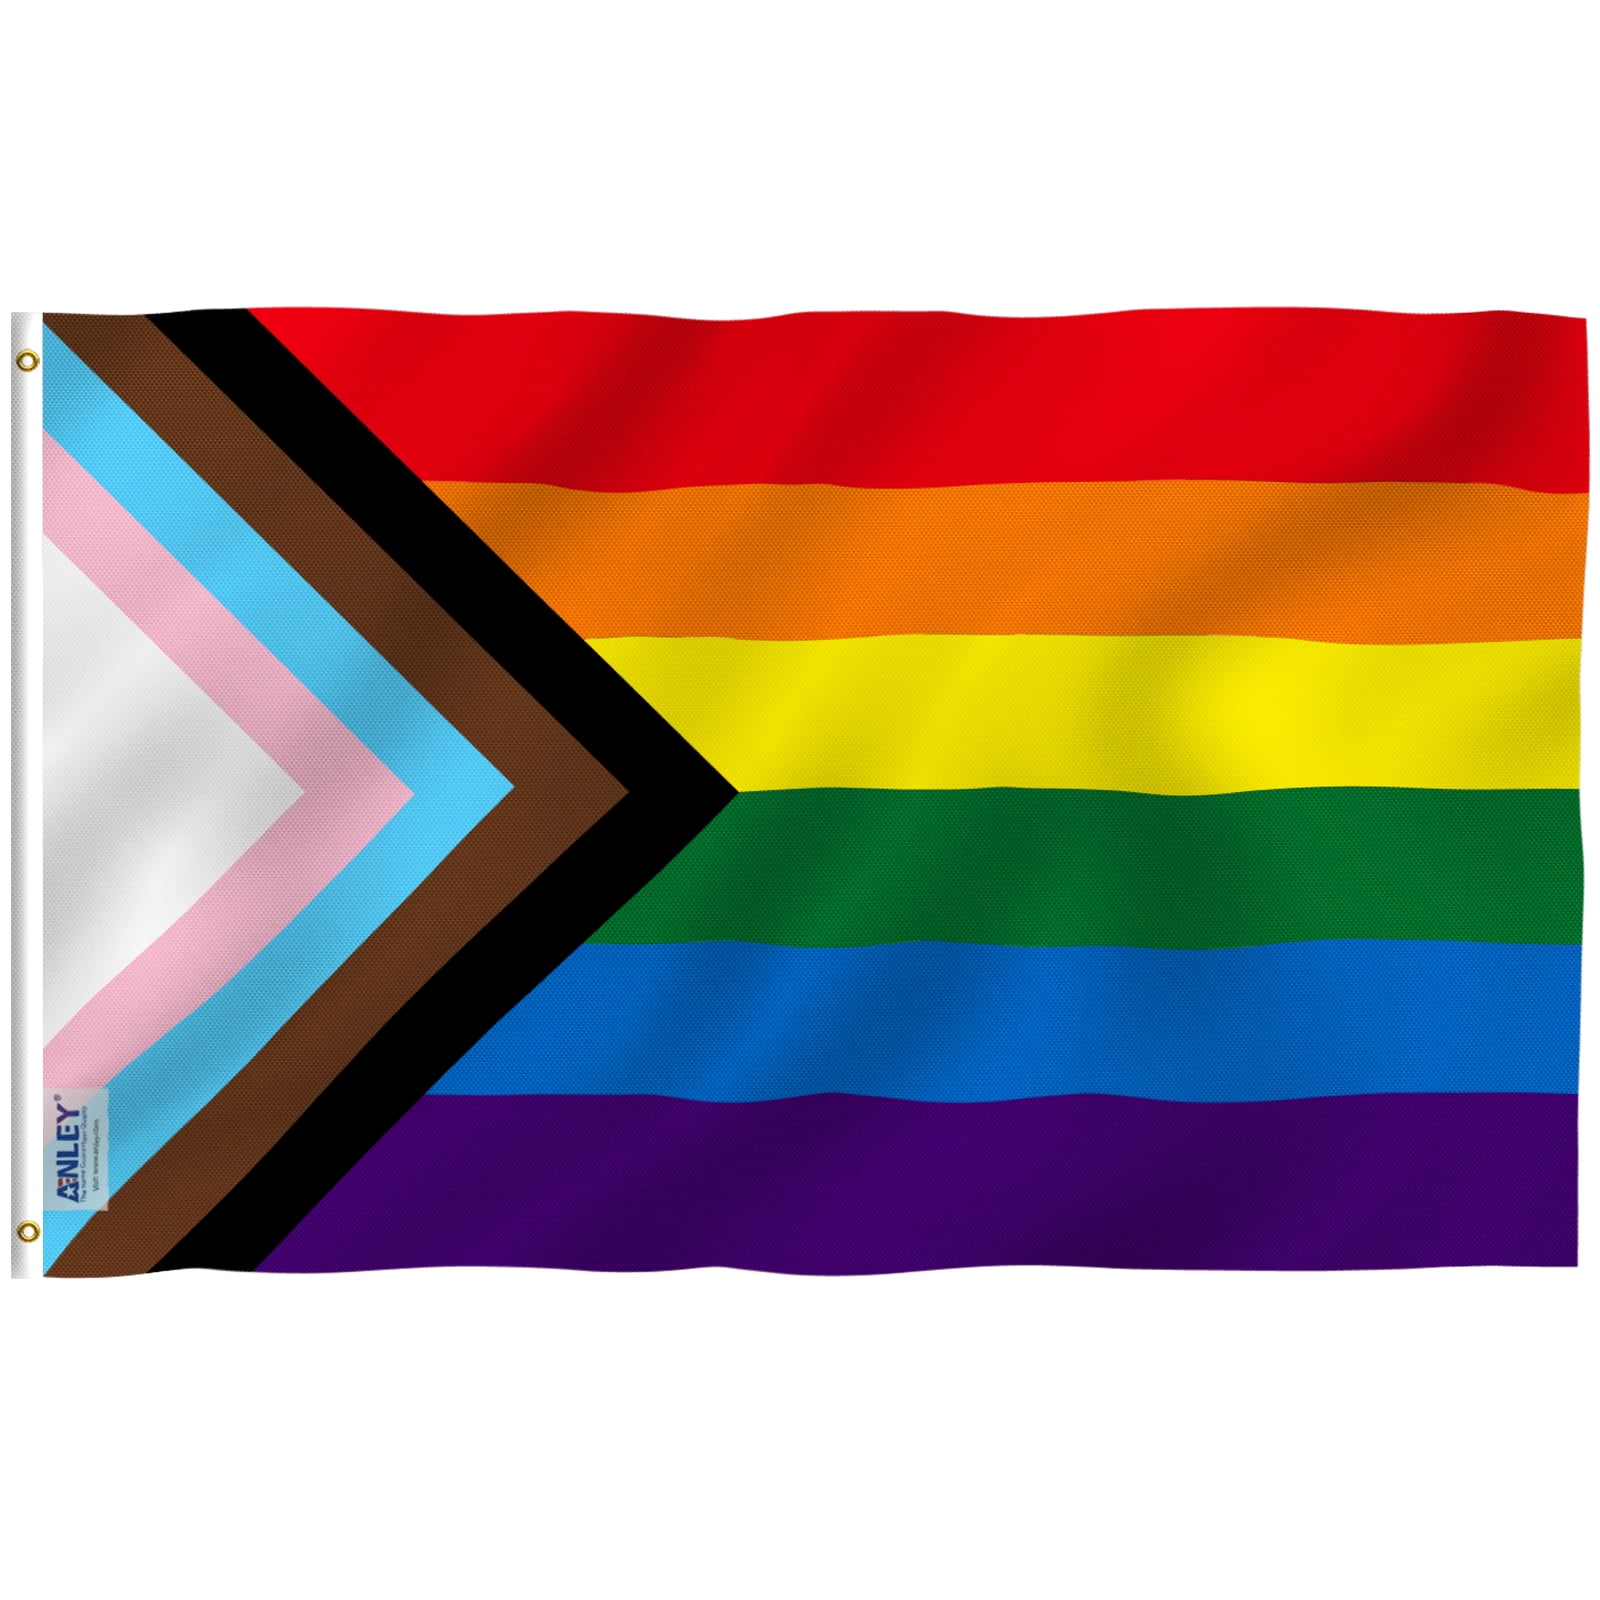 Transgender Trans Pride Rainbow Flag 3x5Ft Outdoor- LGBT Pride Flags Banner  with Brass Grommets for Outdoor Wall